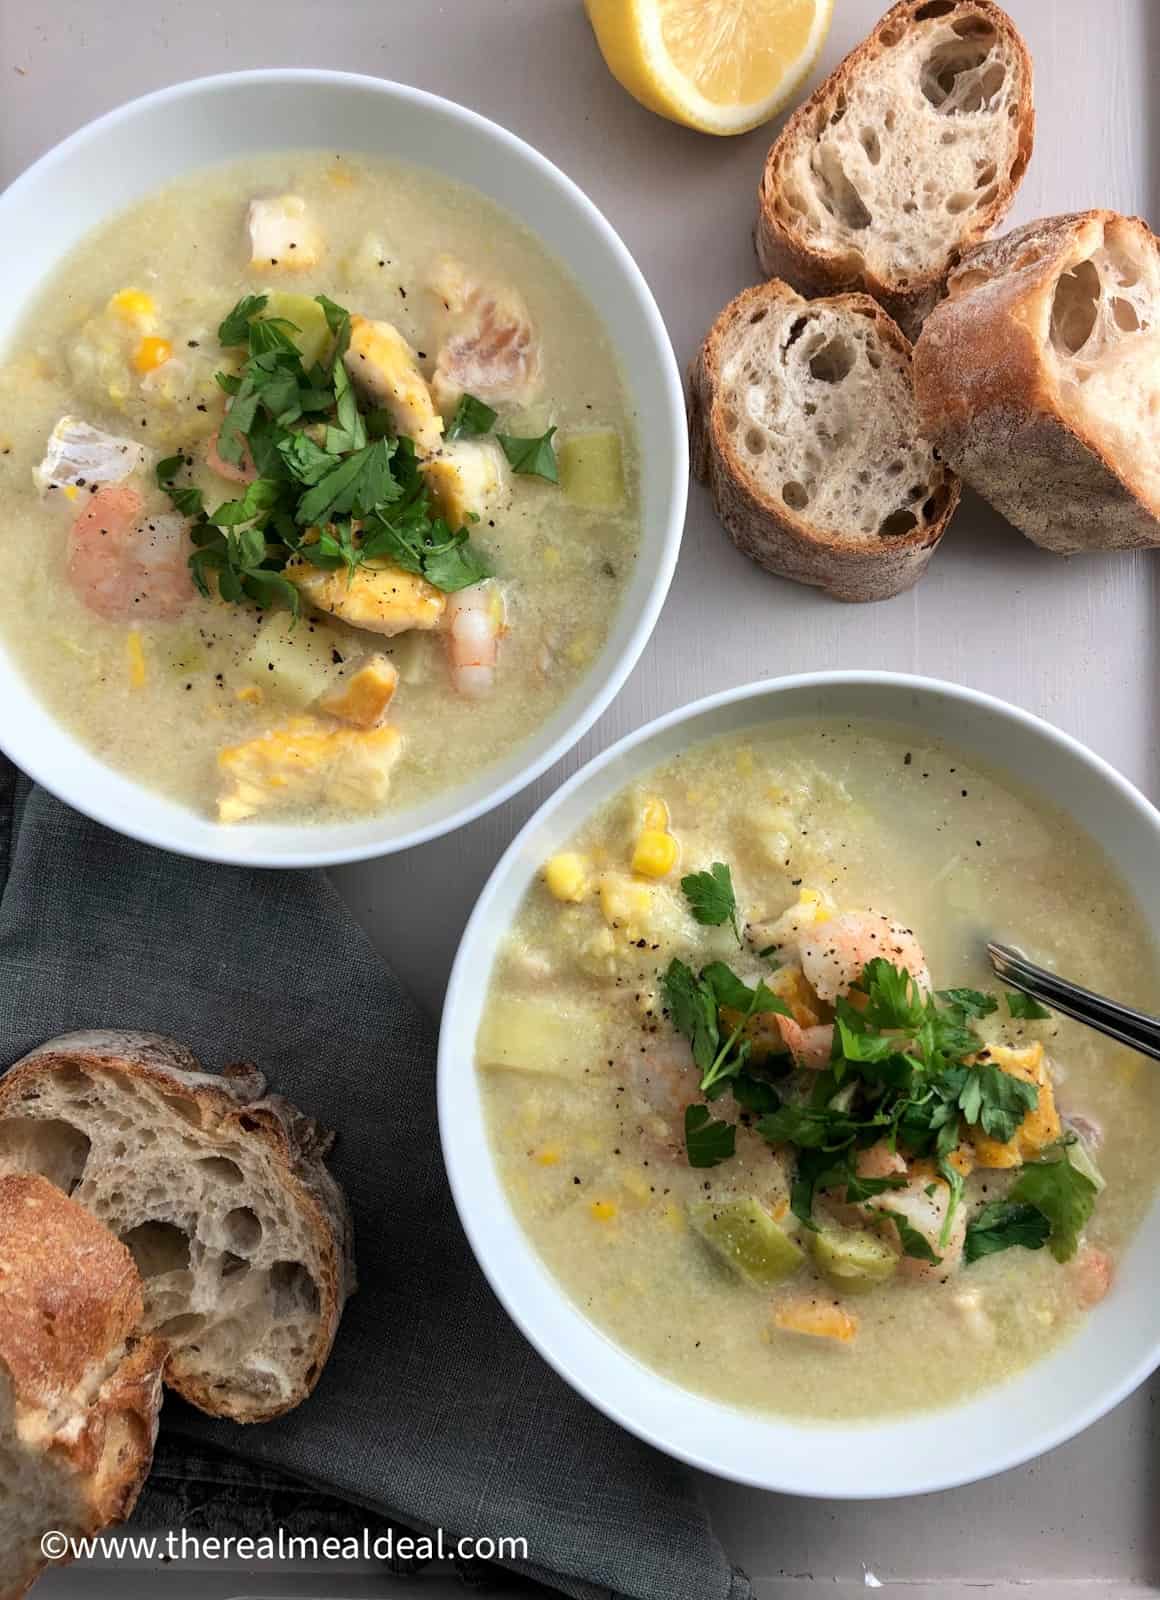 two bowls of smoked haddock and prawn chowder on a tray with sliced baguette half lemon and bowl of chopped parsley